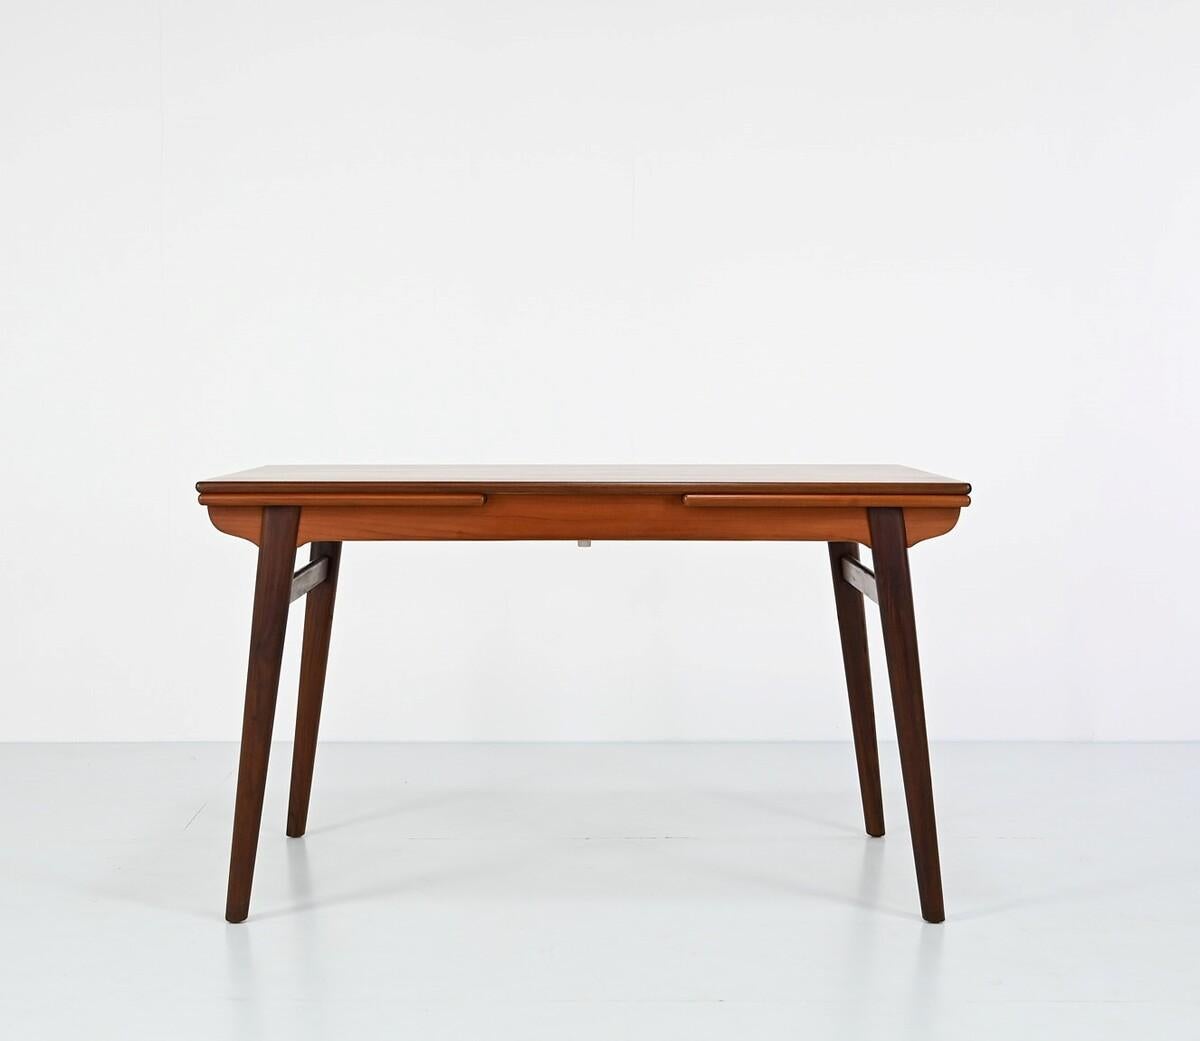 Mid Century danish extendable Dining Table by Hans J. Wegner

size of the table with extension is 227x85x75.5cm